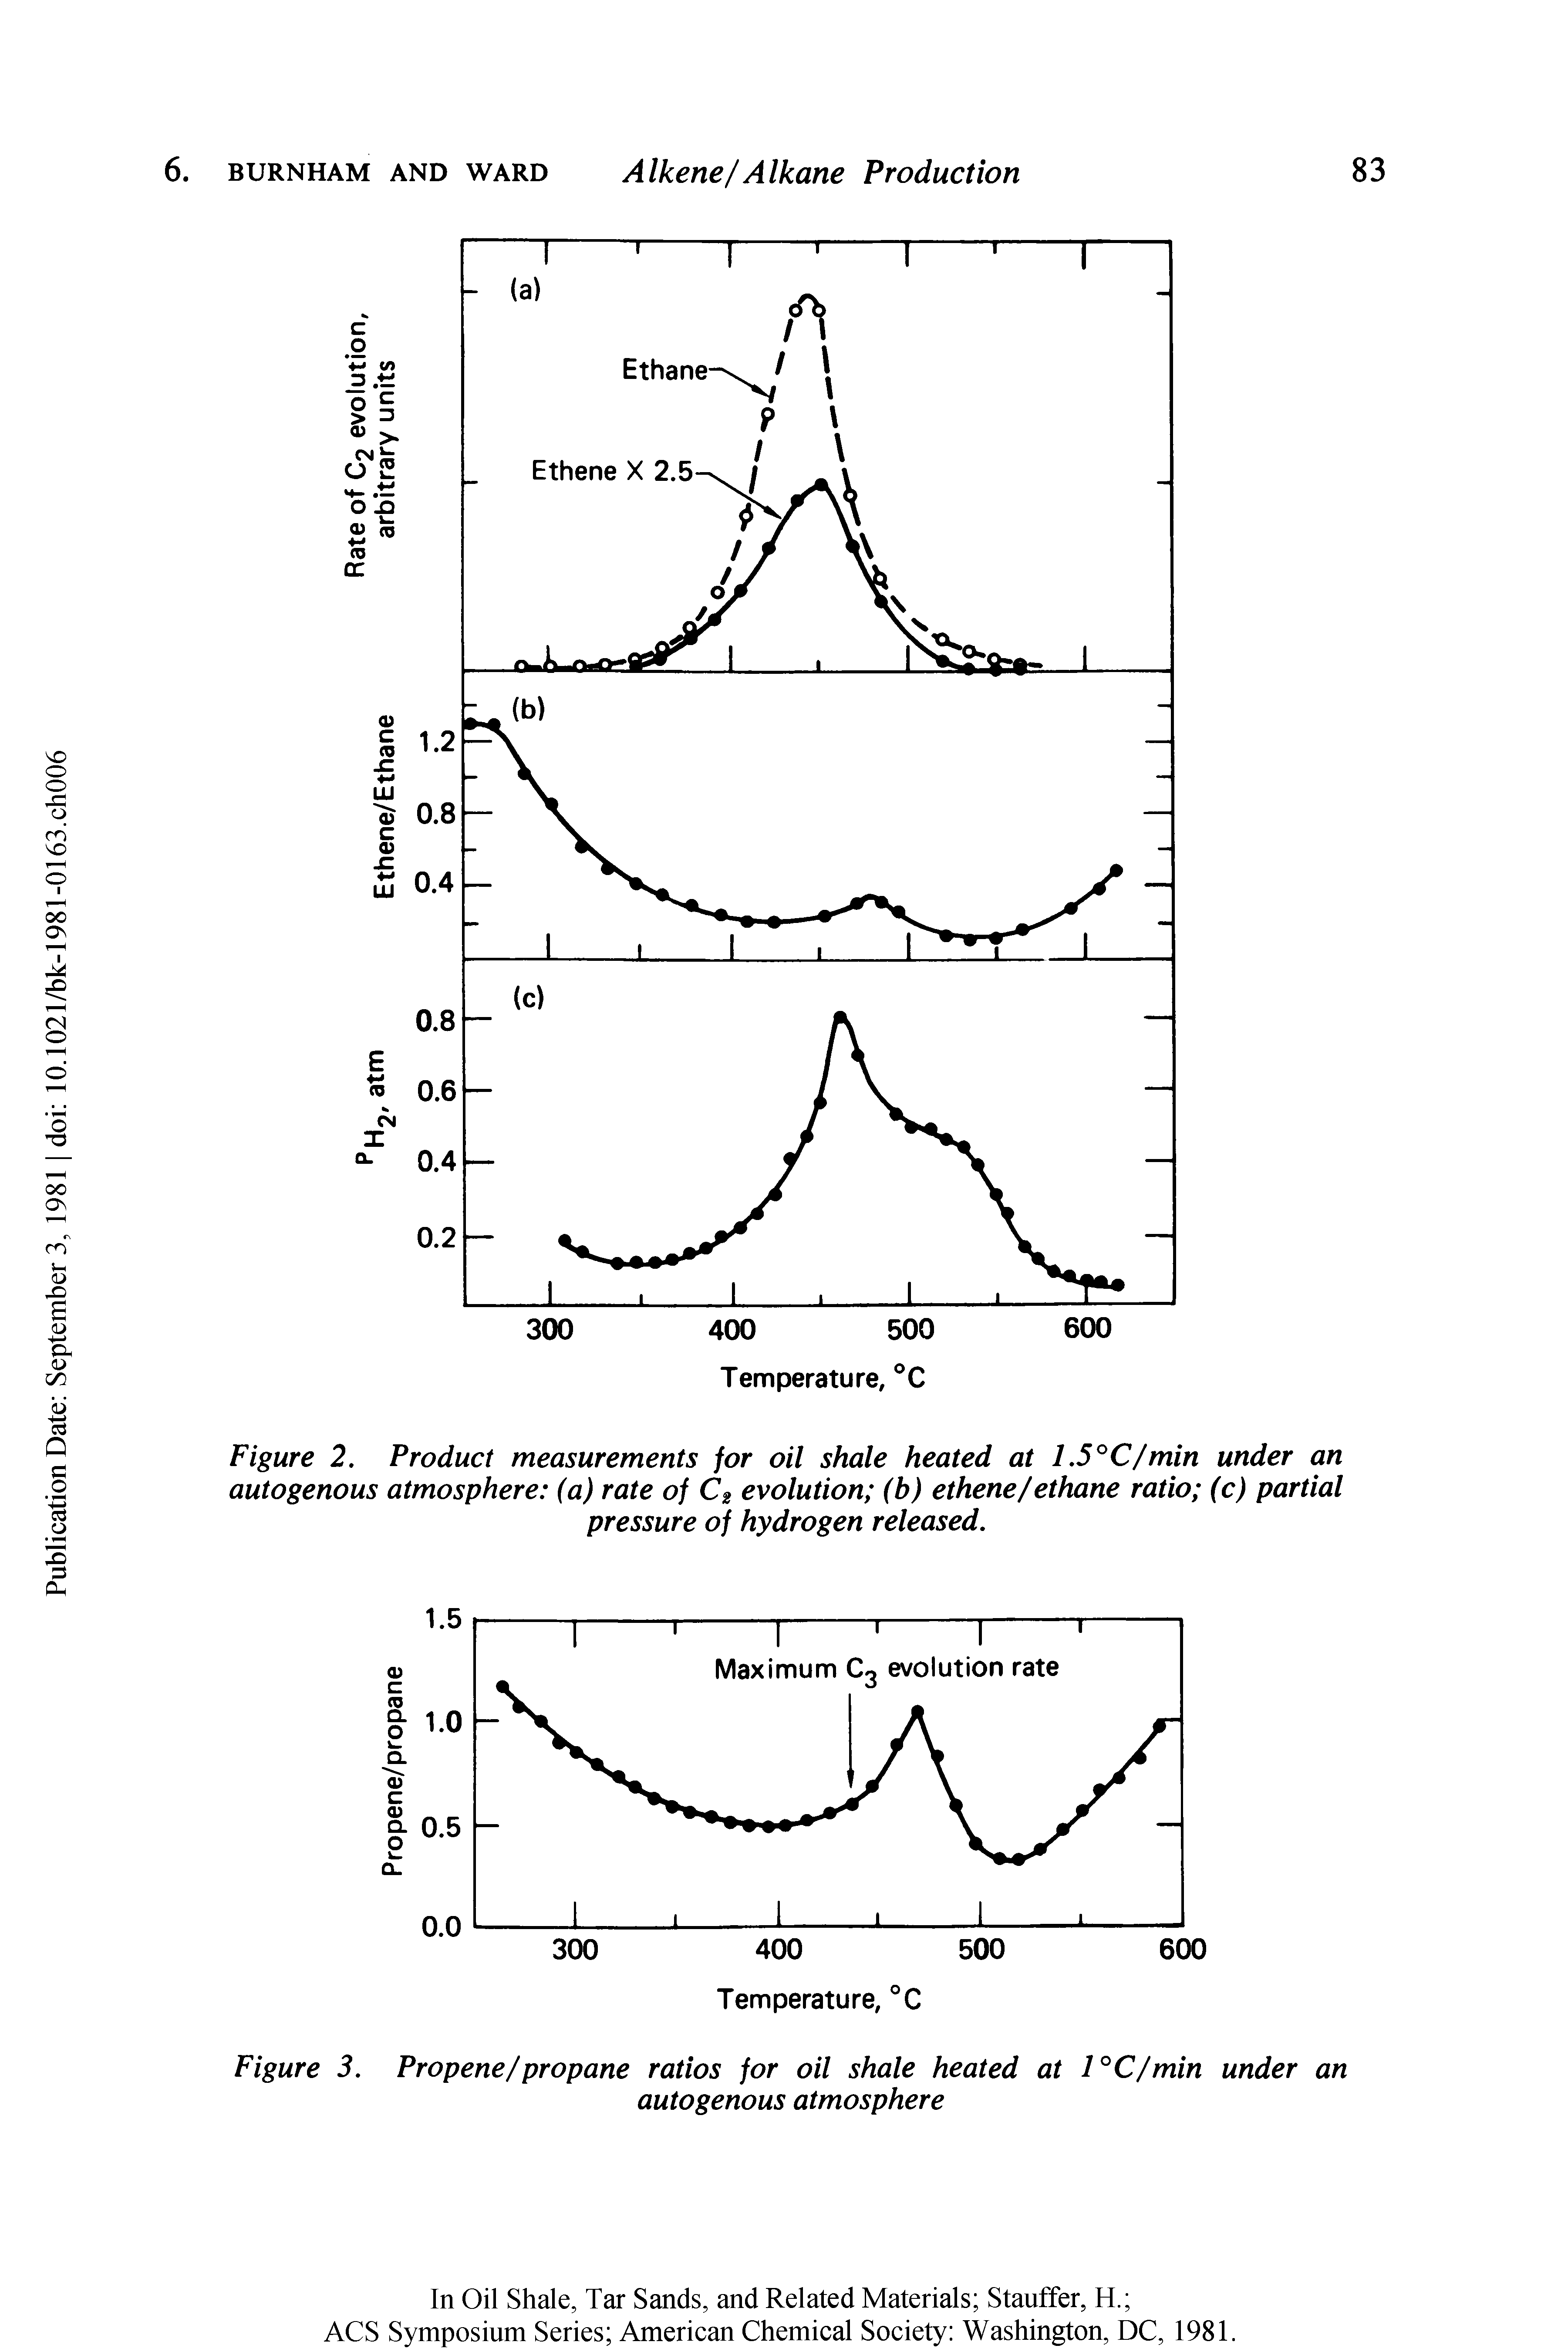 Figure 2. Product measurements for oil shale heated at 1.5°C/min under an autogenous atmosphere (a) rate of C2 evolution (b) ethene/ethane ratio (c) partial pressure of hydrogen released.